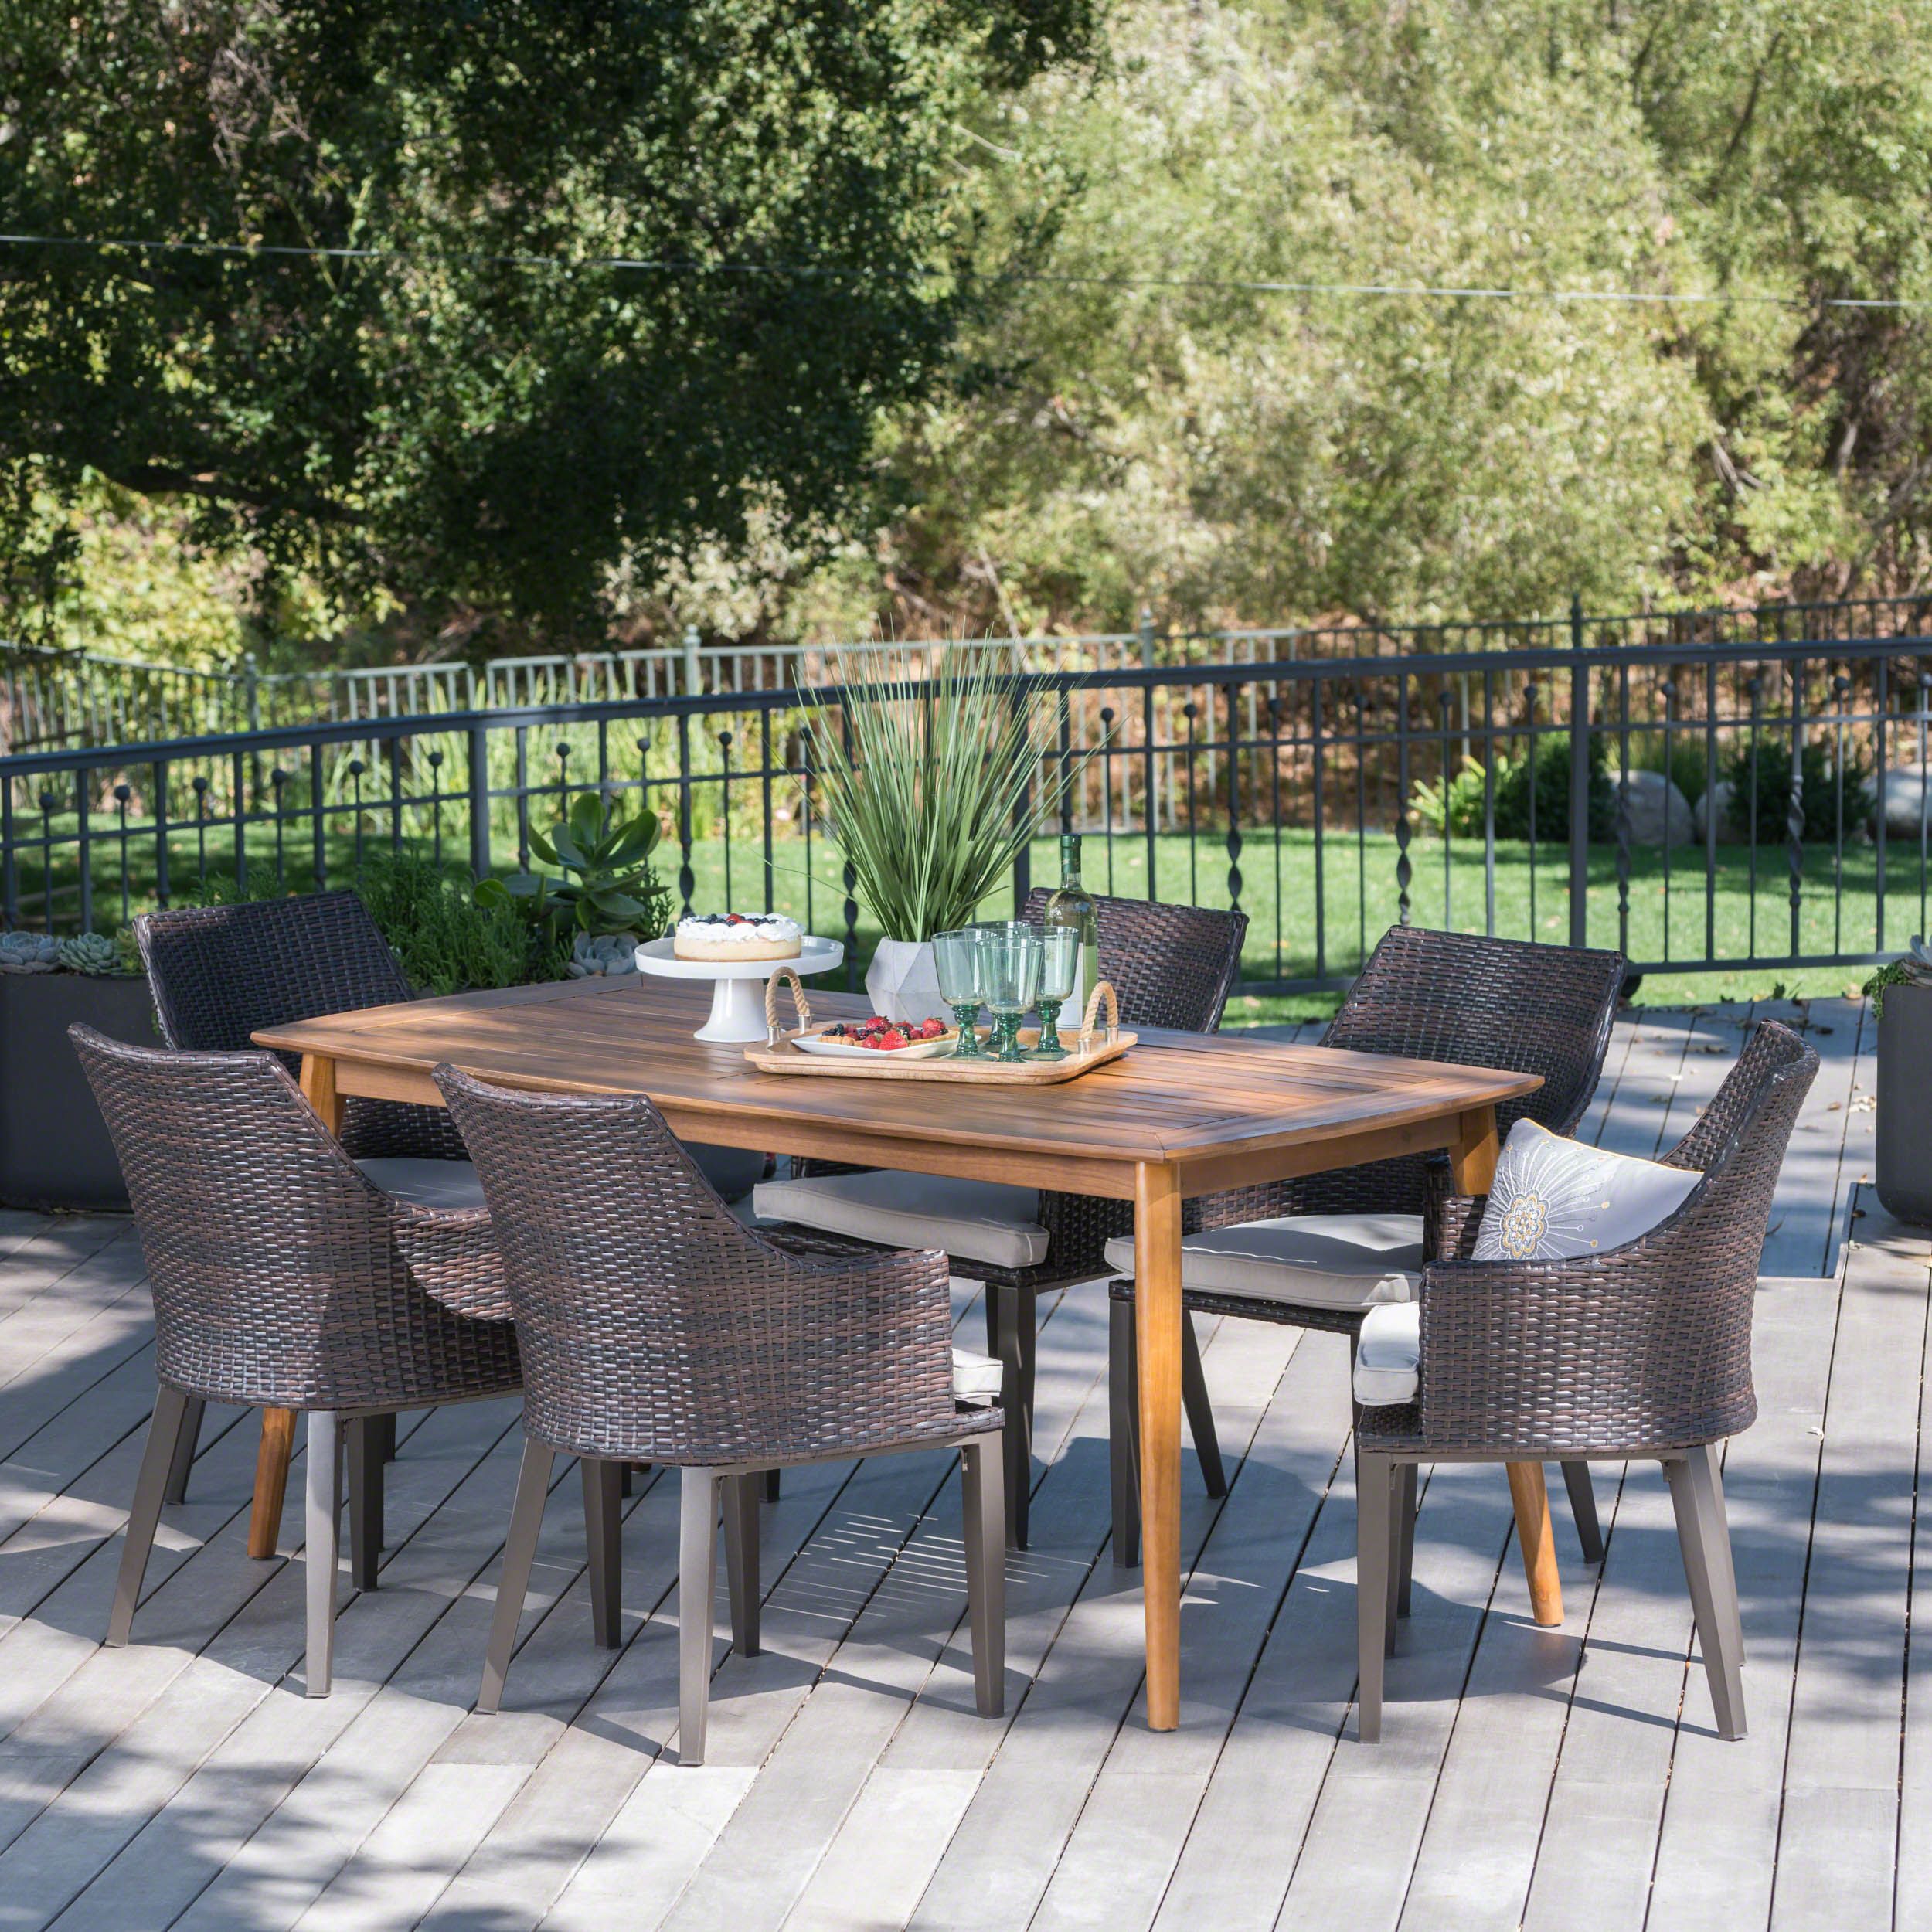 Alexa Outdoor 7 Piece Wicker Rectangular Dining Set With Acacia Wood In Teak Outdoor Square Dining Sets (View 9 of 15)